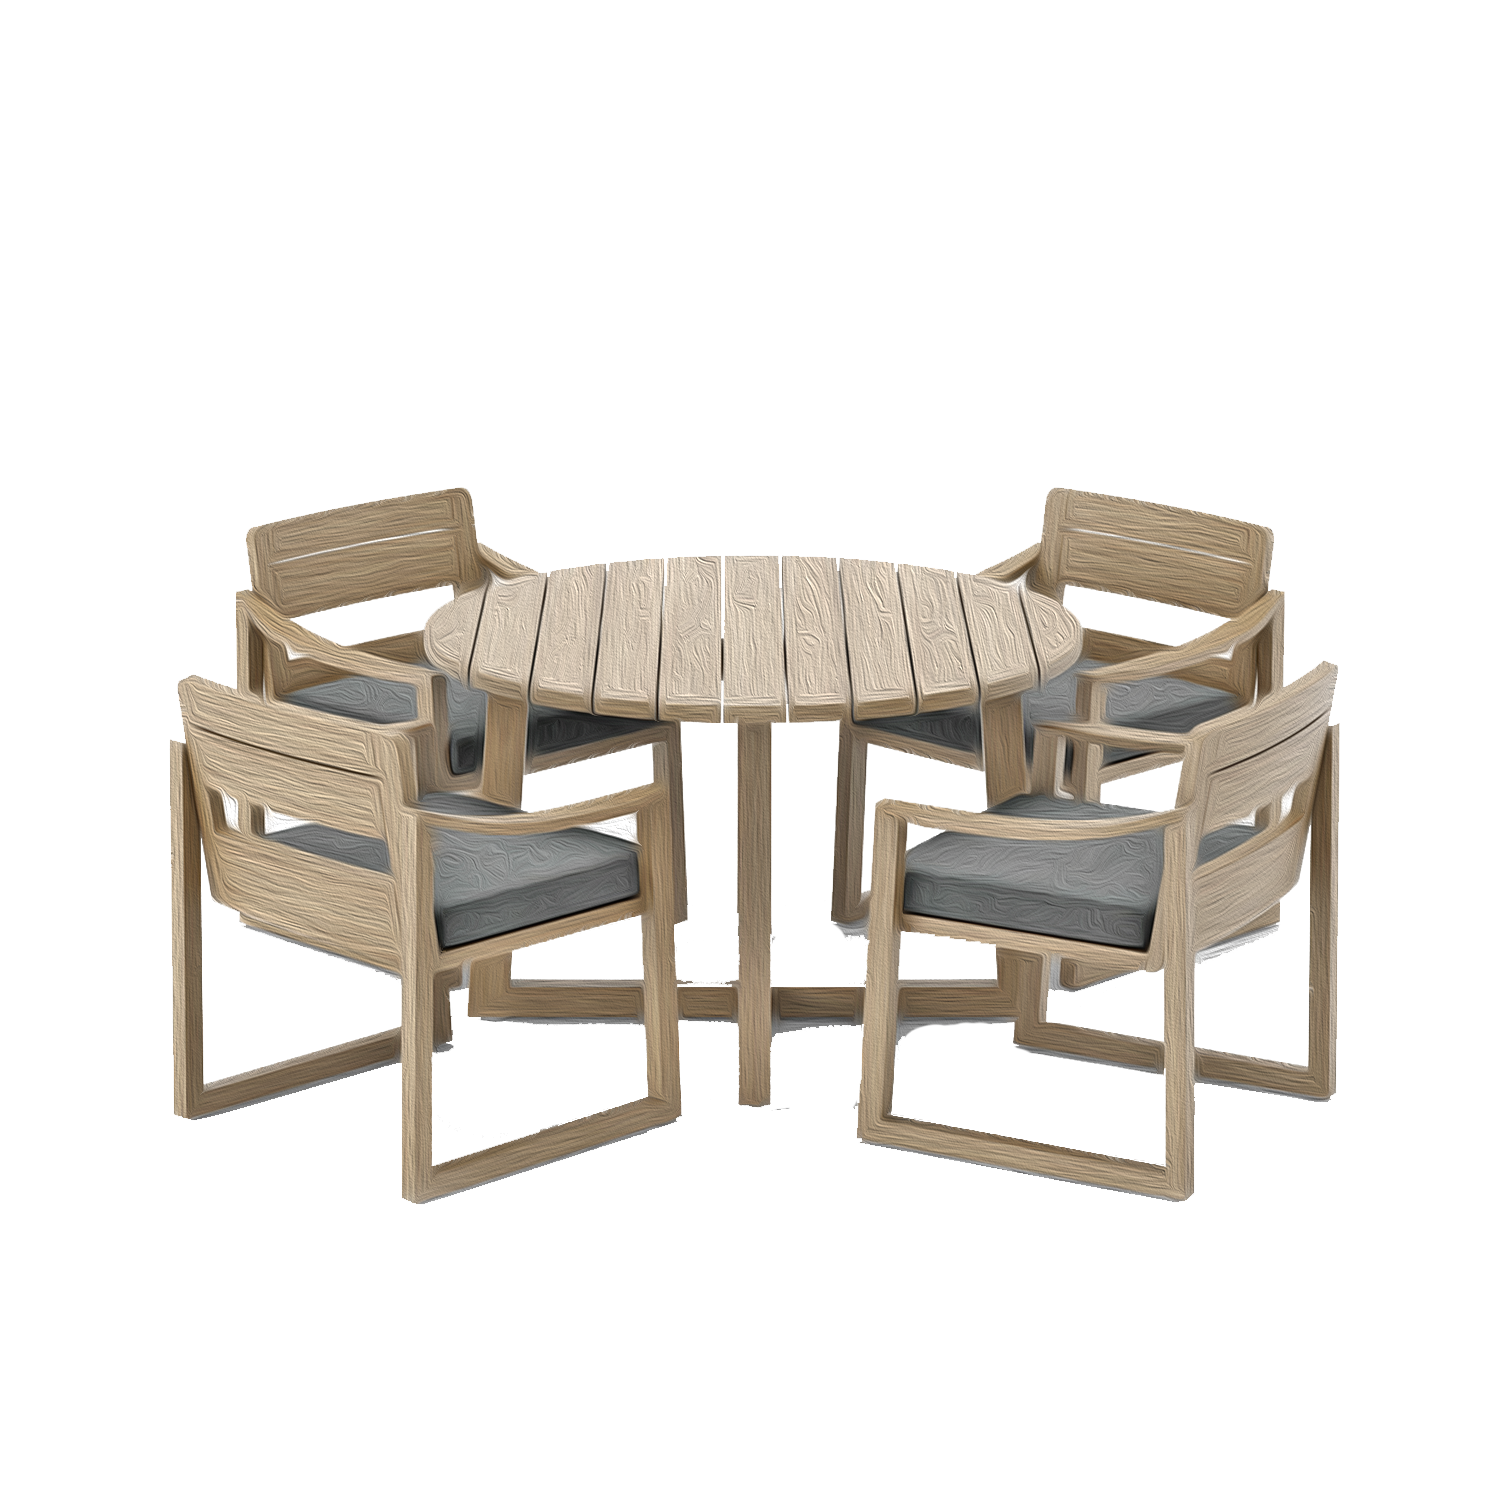 Table with Chairs - Round